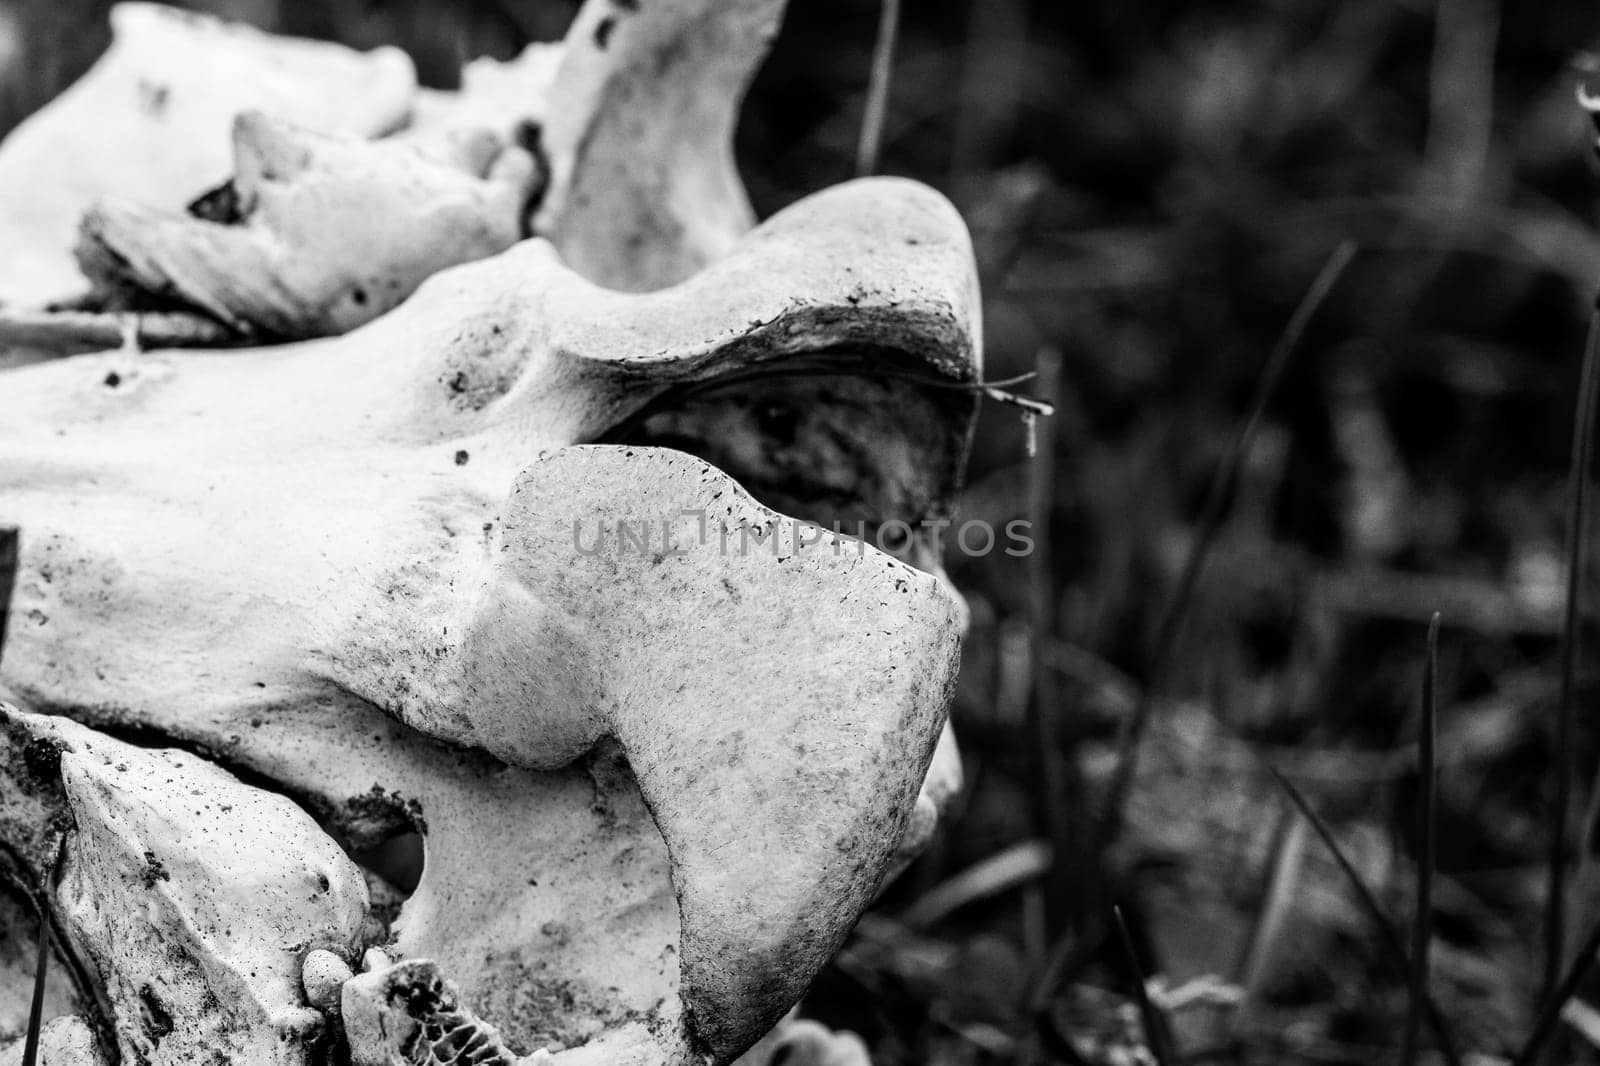 Black and white photo of an old caribou shoulder or hip bone found on the arctic tundra, near Arviat, Nunavut, Canada